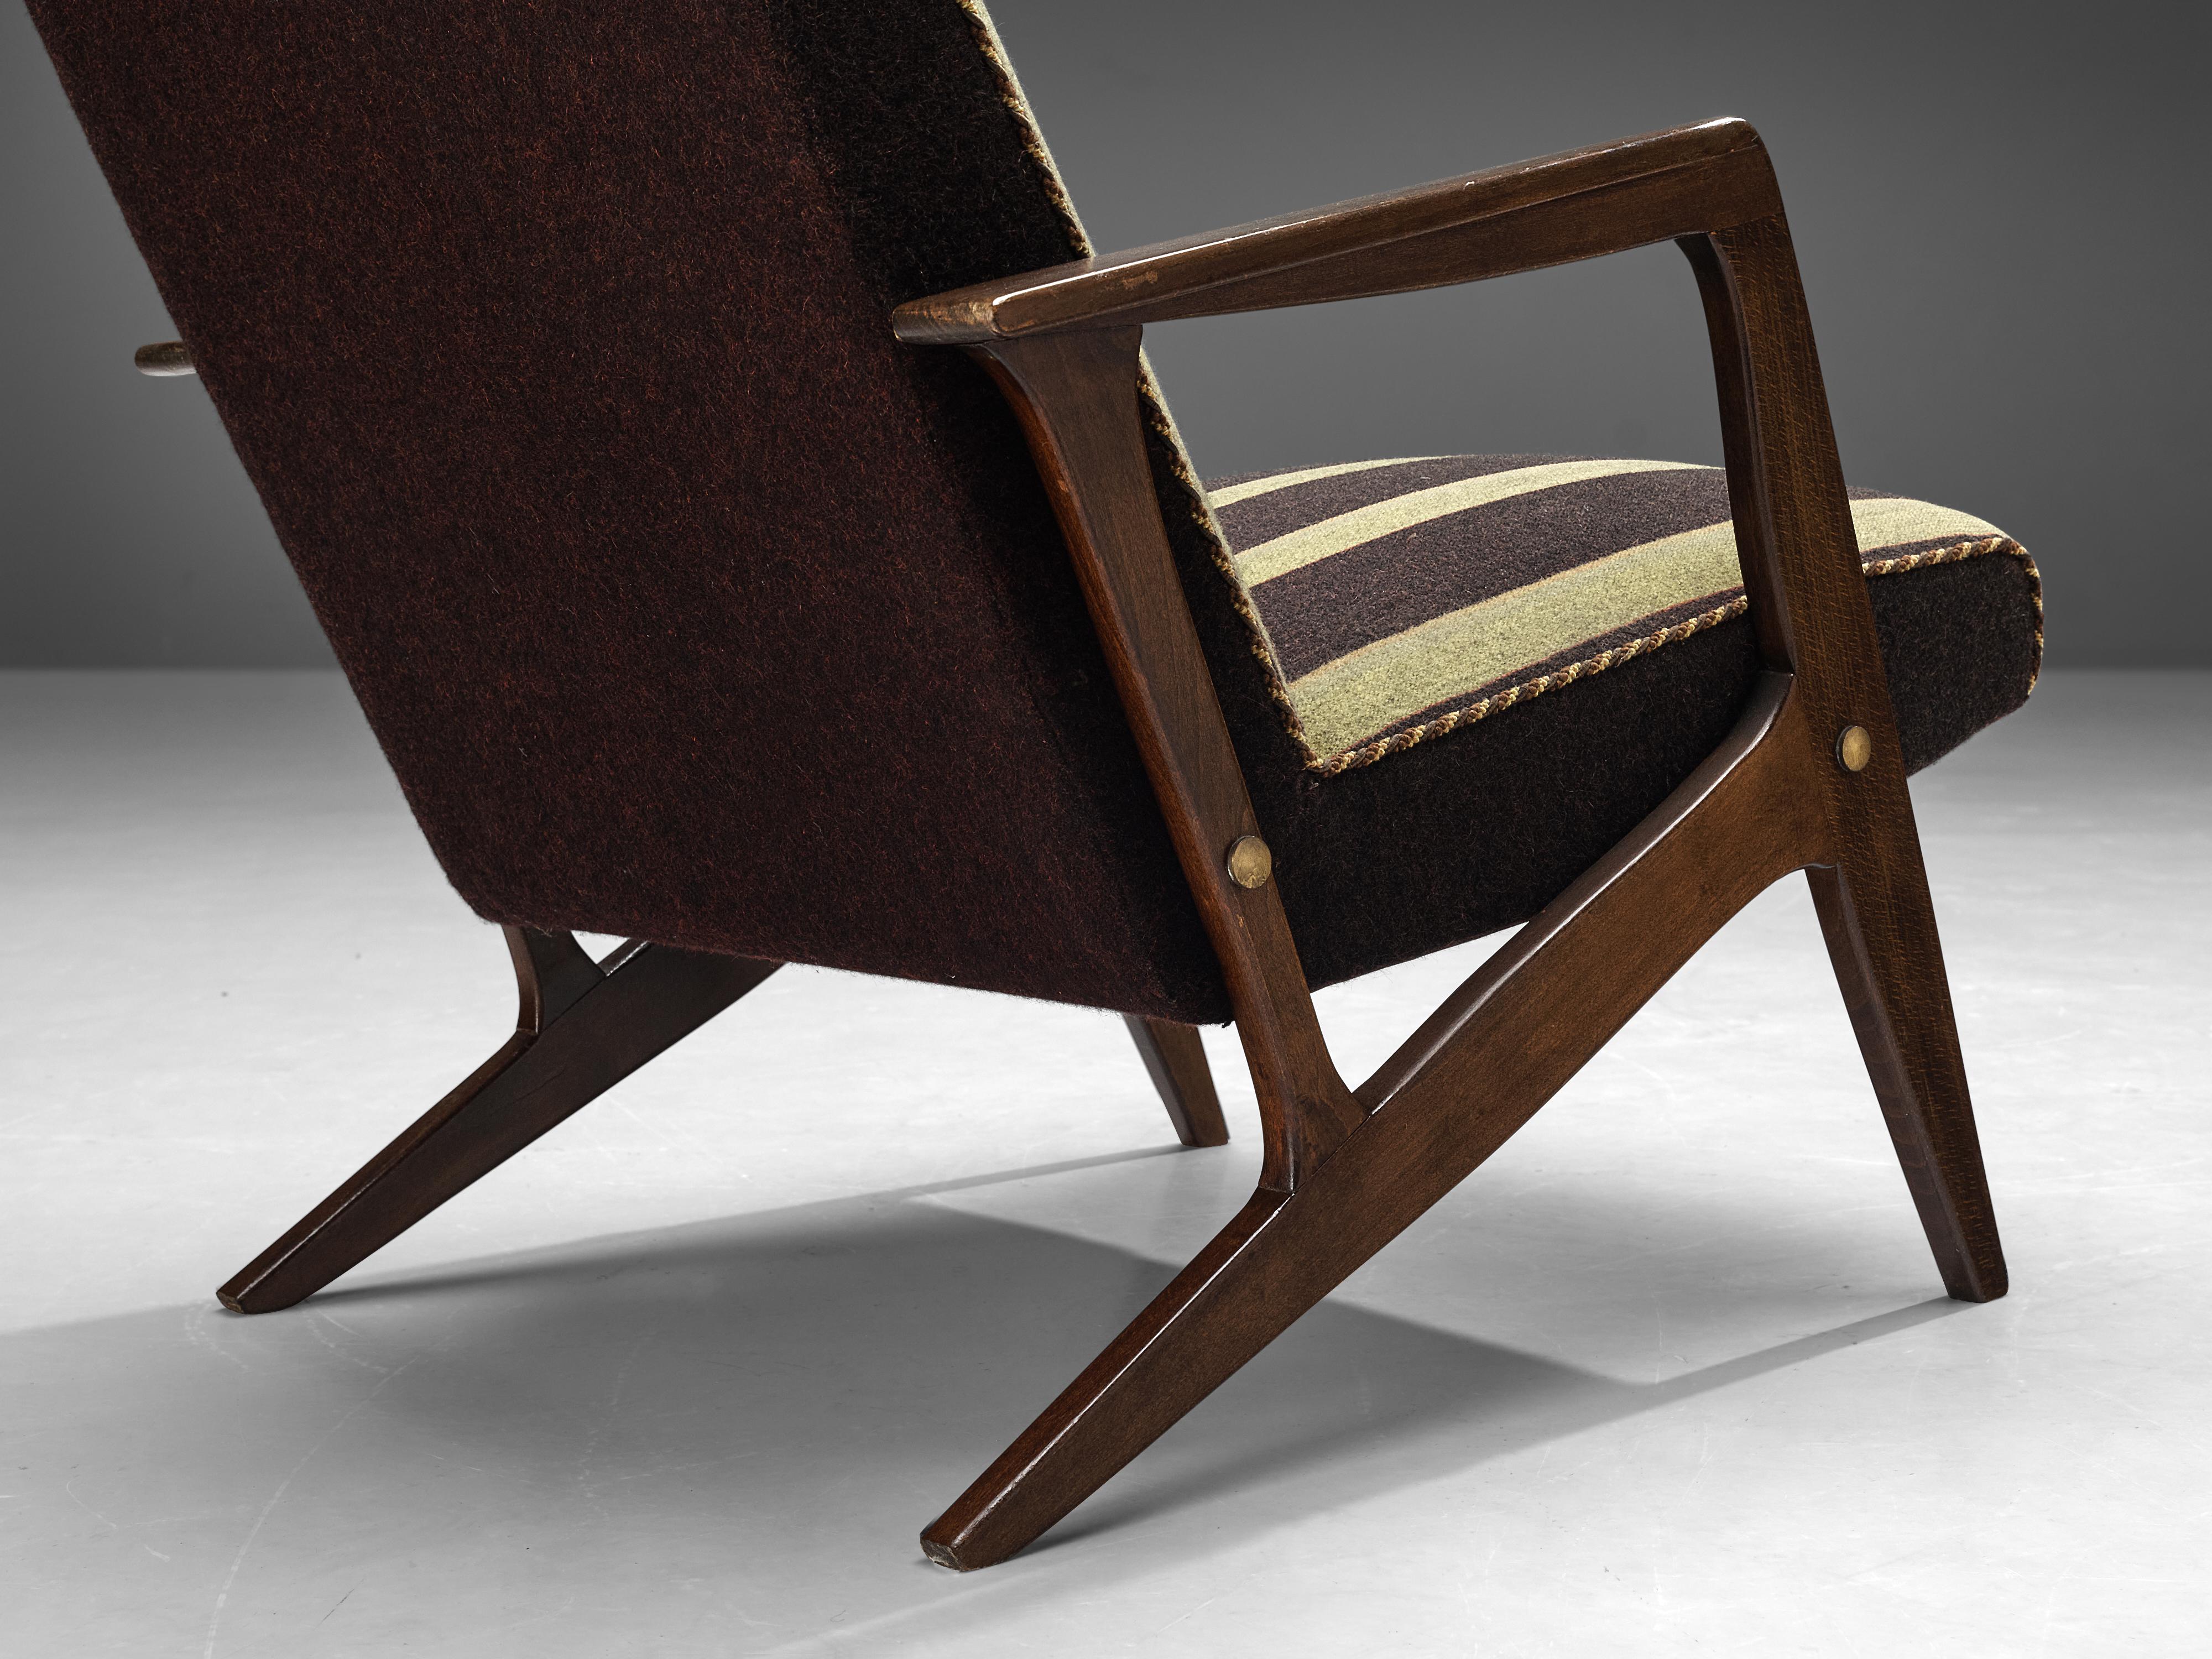 Mid-20th Century Danish Lounge Chair in Brown Striped Upholstery